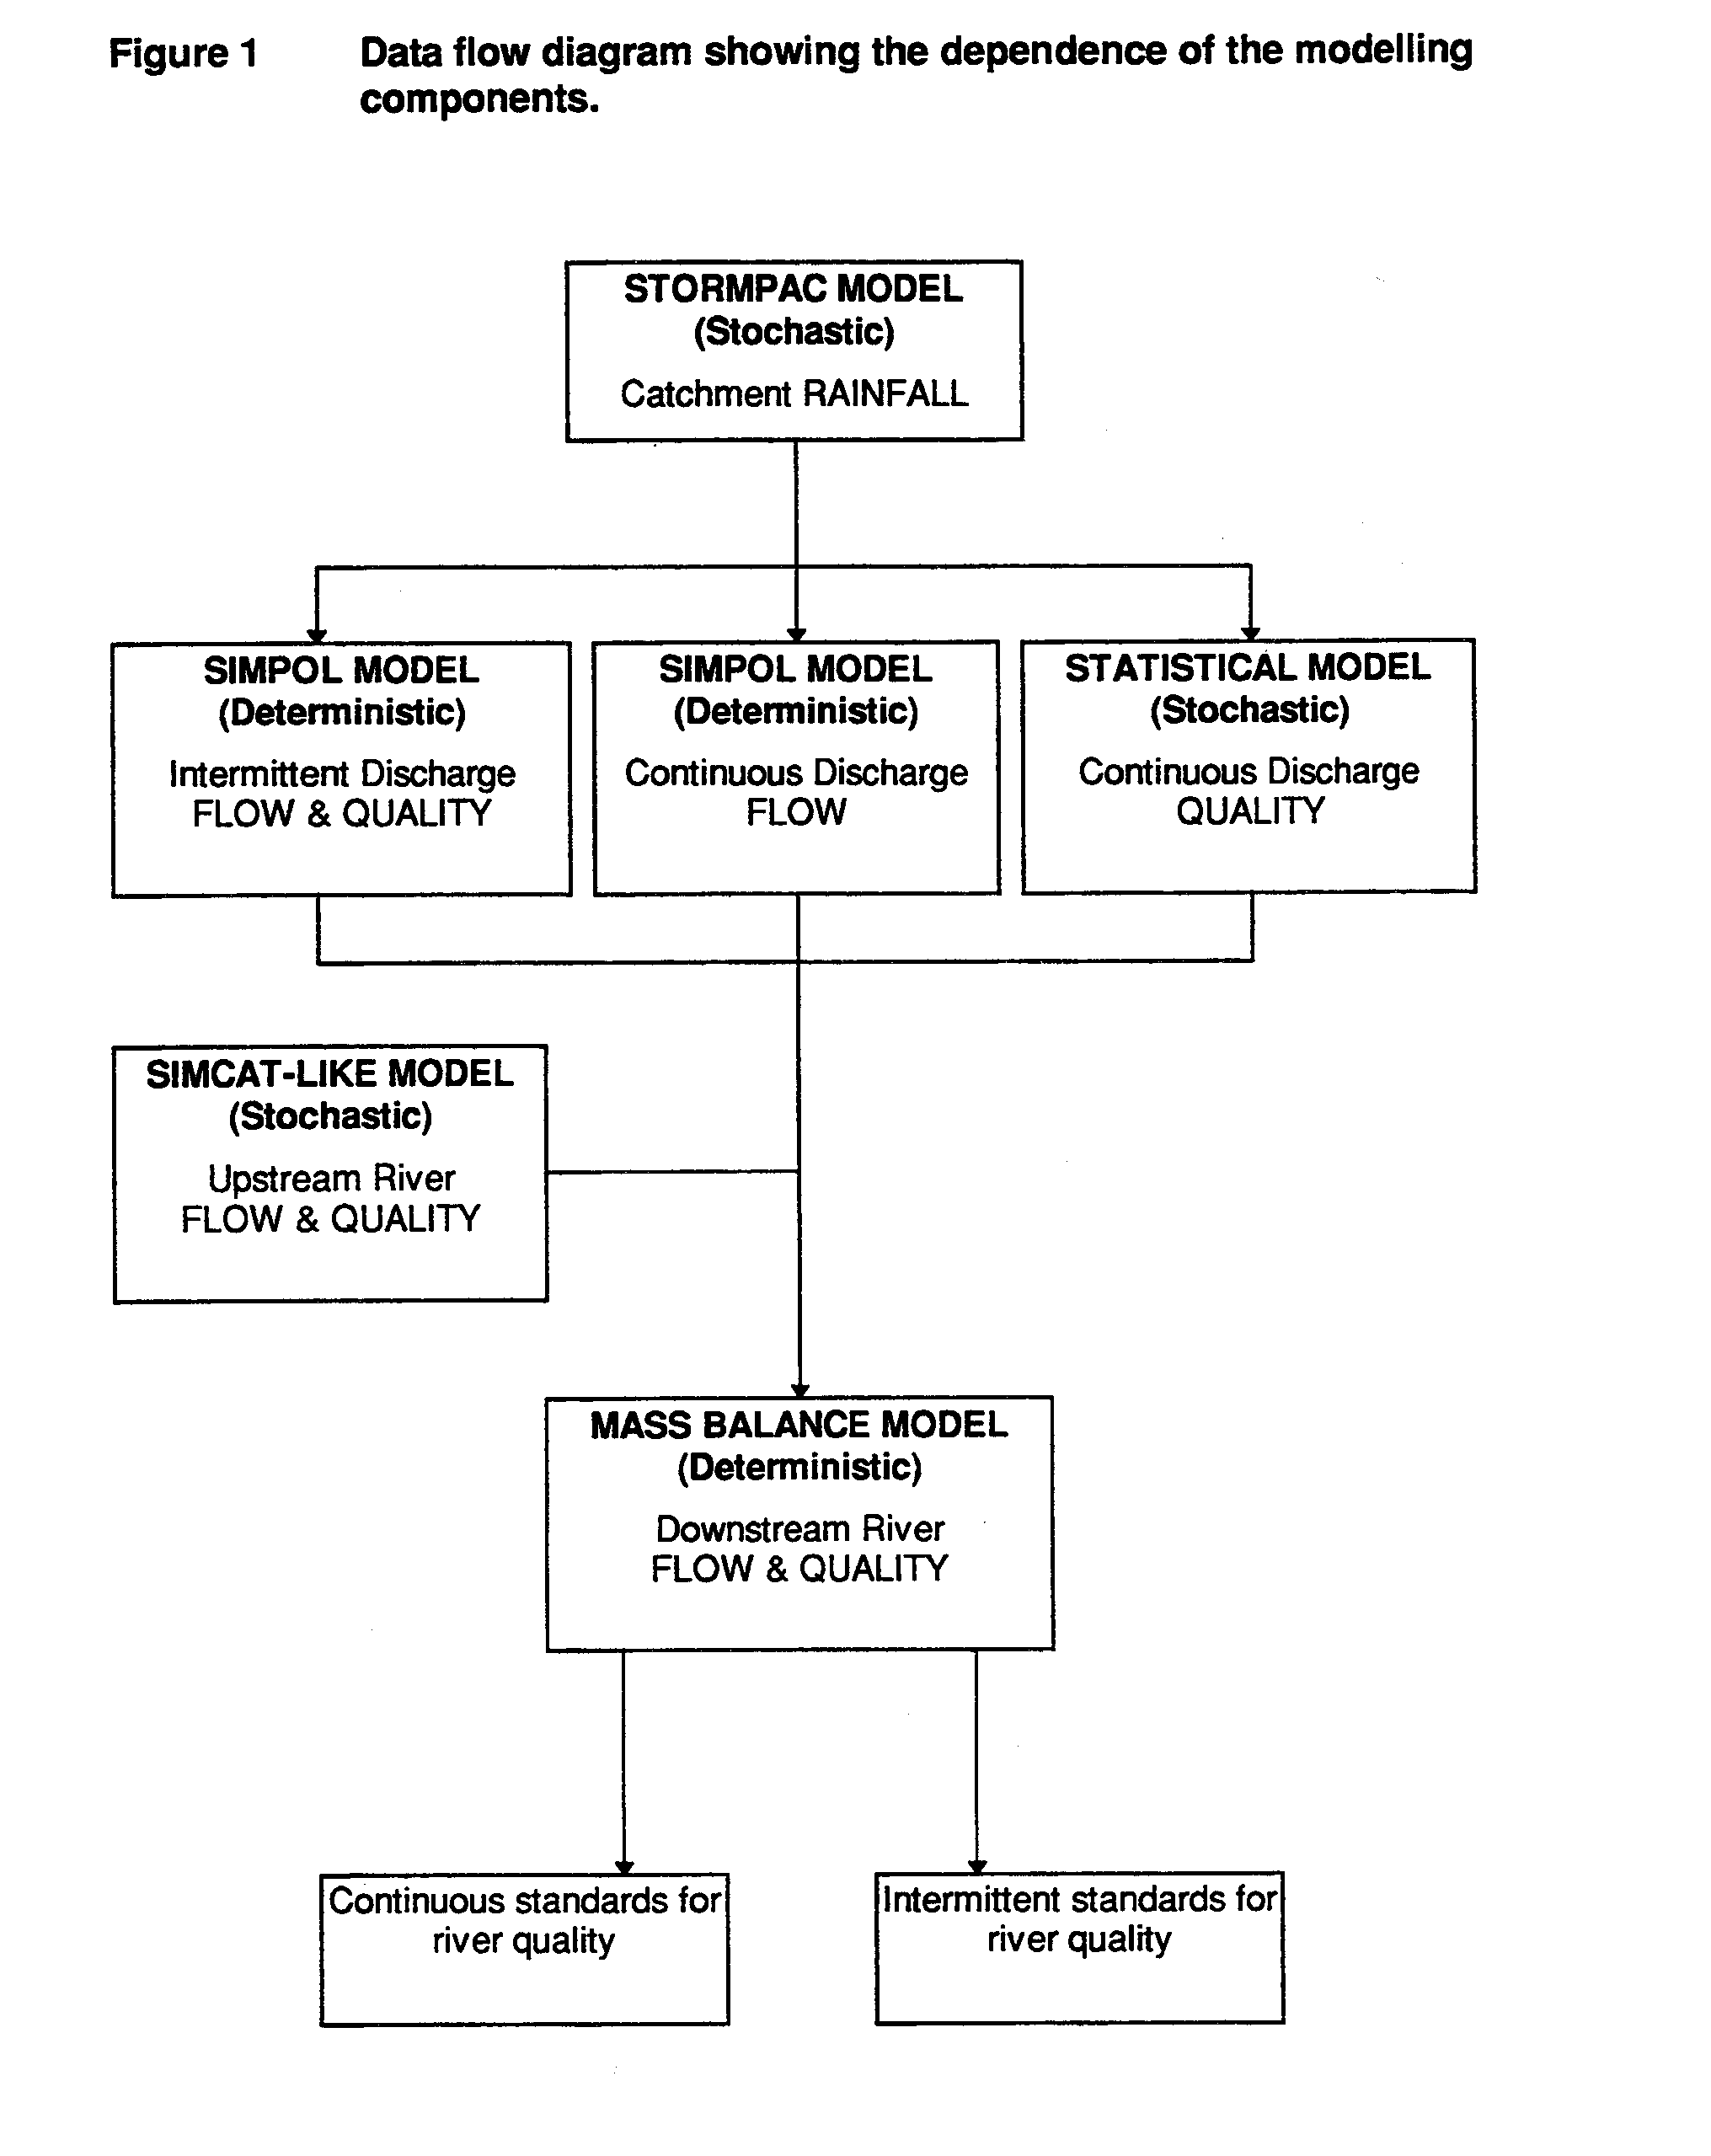 Figure 1 Data flow diagram showing the dependence of the modelling components.